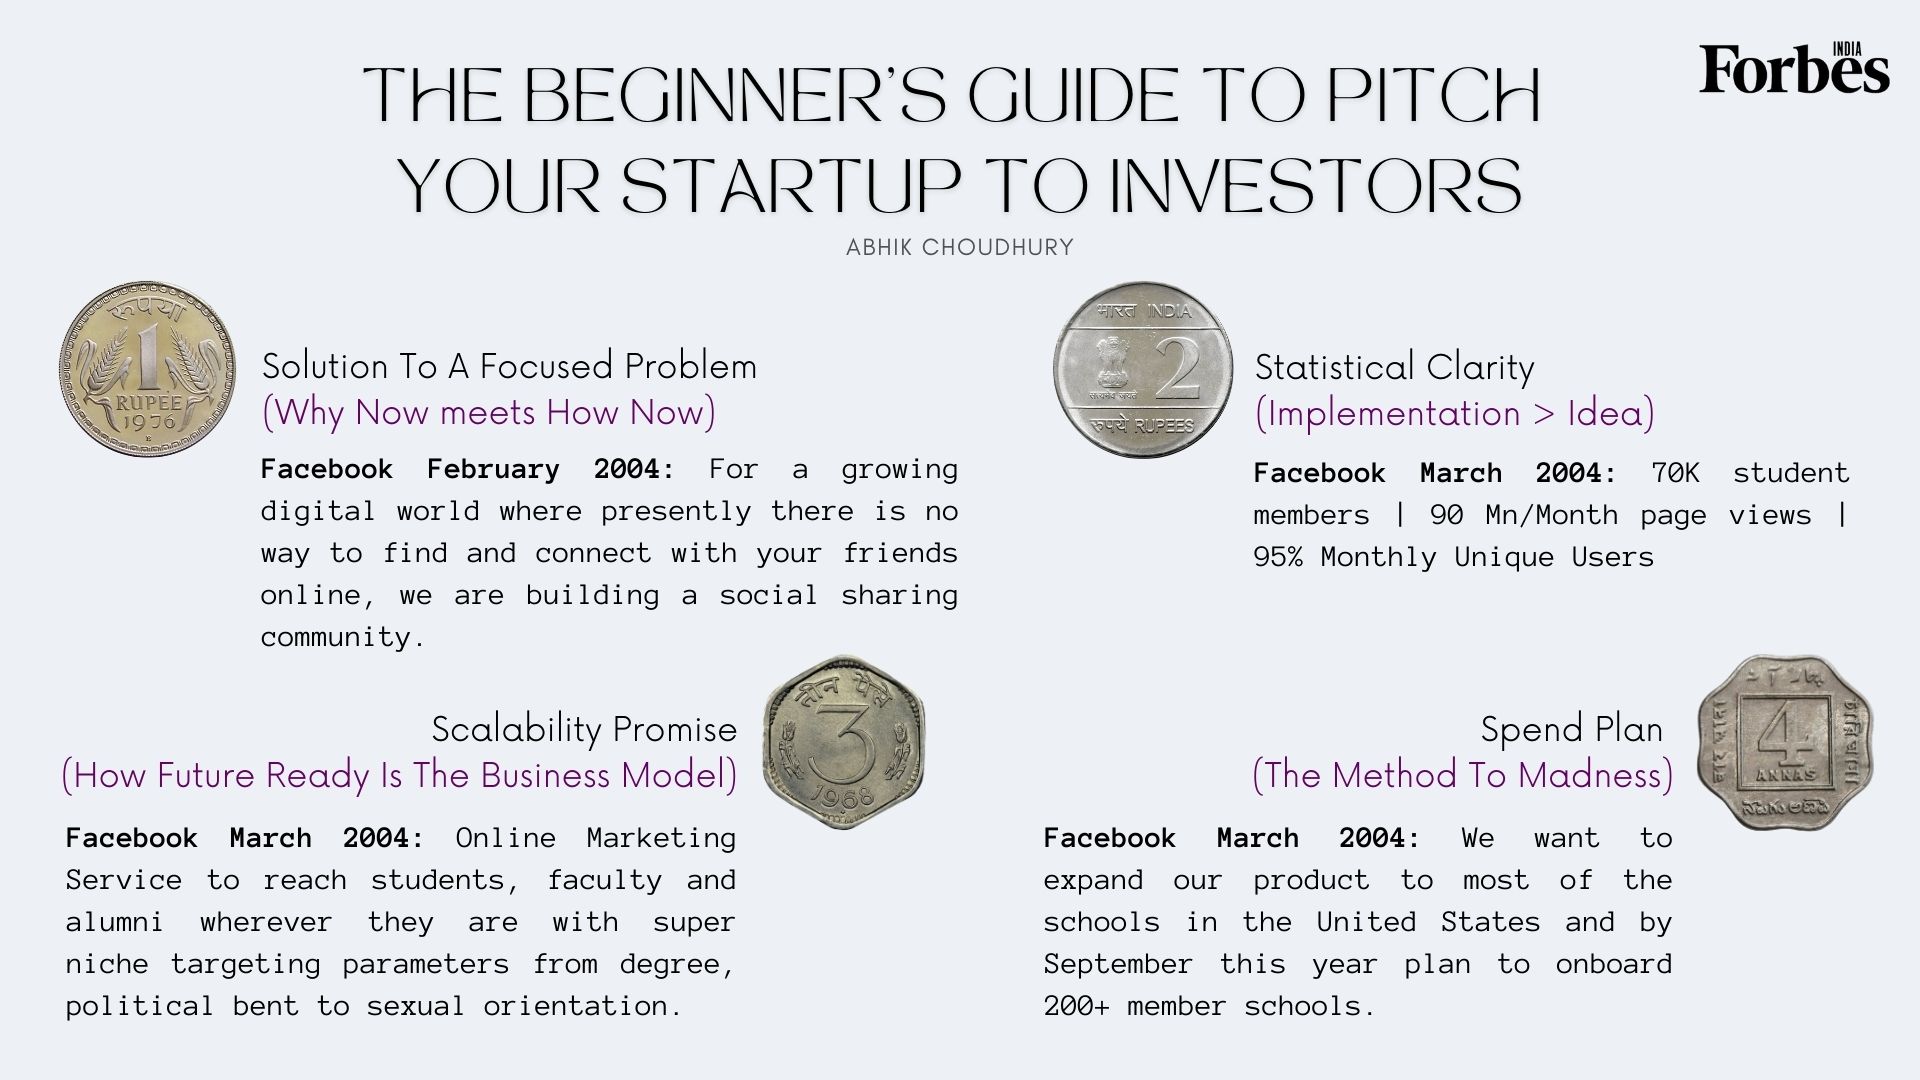 A beginner's guide to pitching startup ideas to investors